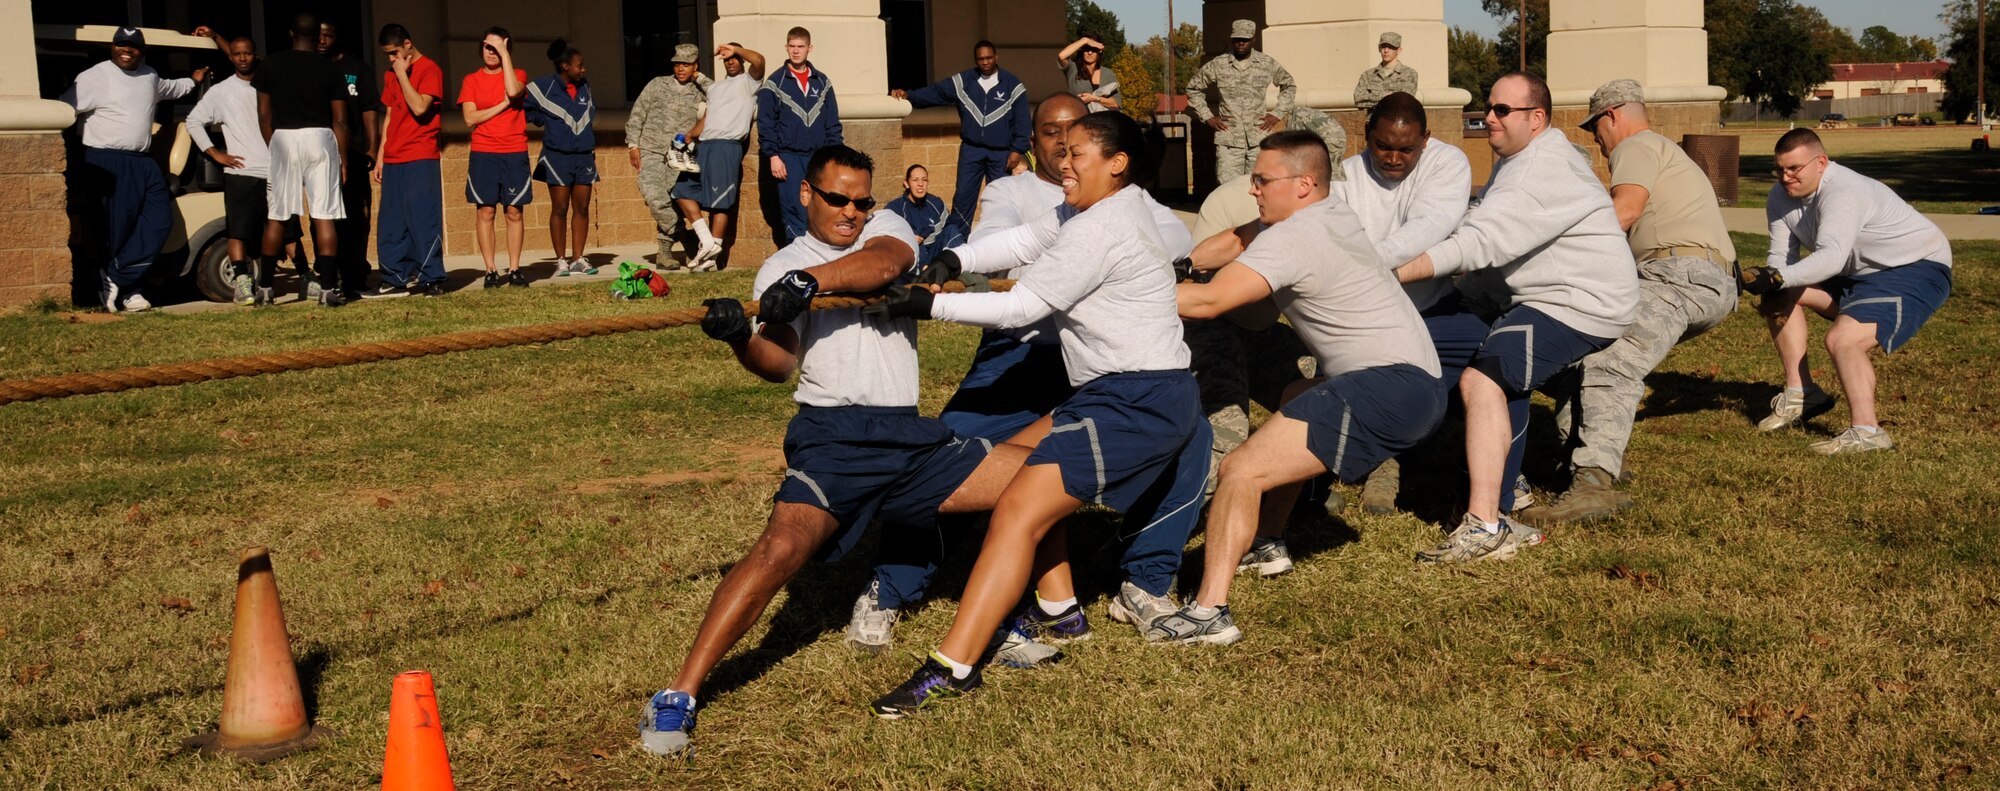 Team Barksdale members participate in a game of tug-of-war during the 2012 Sports Day on Barksdale Air Force Base, La., Nov. 16. Sports Day was designed to improve teamwork and promote the Air Force's Fit-to-Fight mission. (U.S. Air Force photo/Airman 1st Class Andrew Moua)(RELEASED)